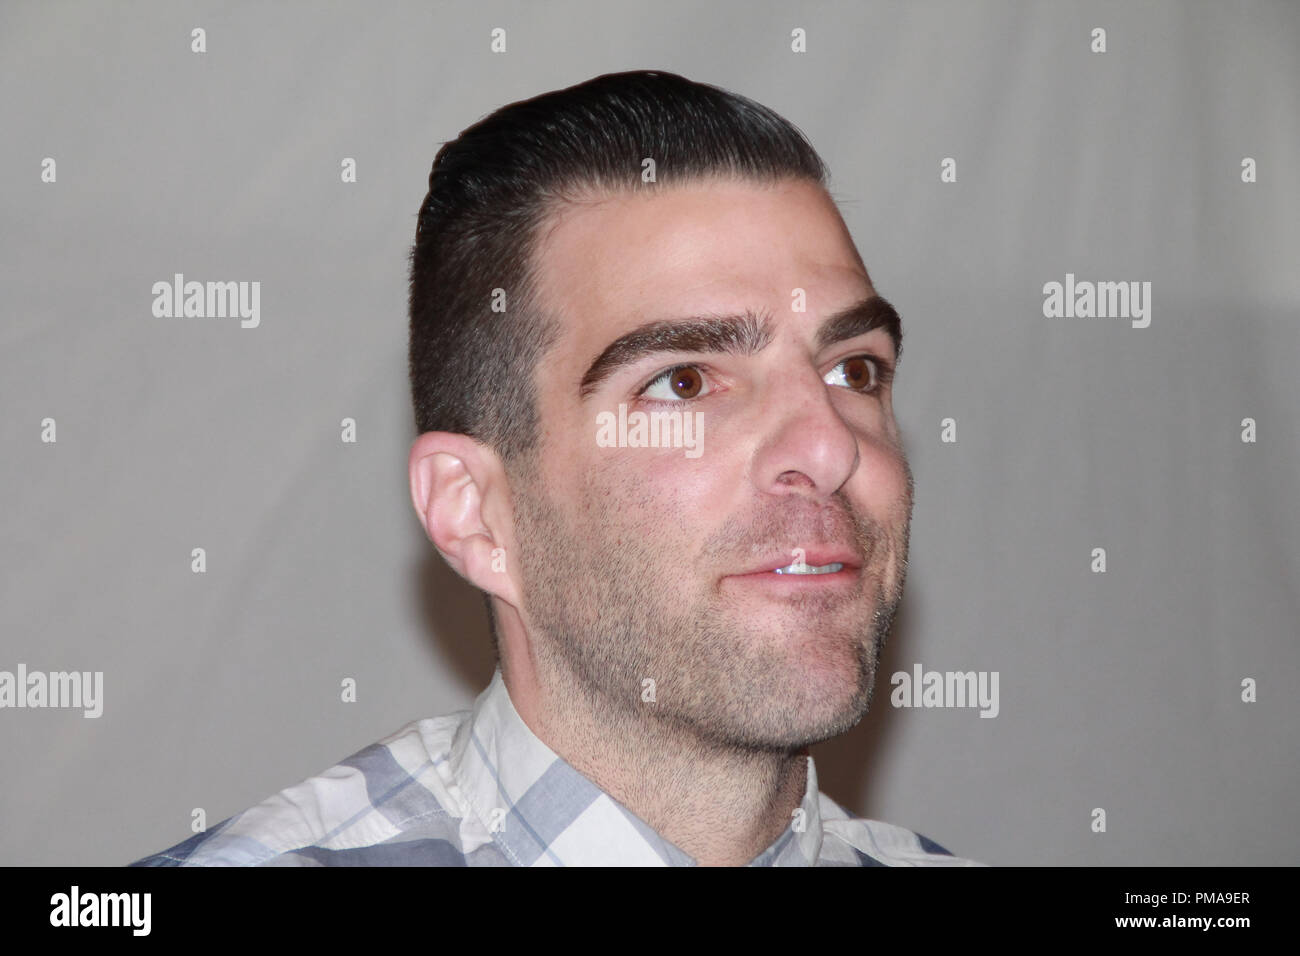 Zachary Quinto 'Star Trek Into Darkness' Portrait Session, May 5, 2013. Reproduction by American tabloids is absolutely forbidden. File Reference # 31960 018JRC  For Editorial Use Only -  All Rights Reserved Stock Photo